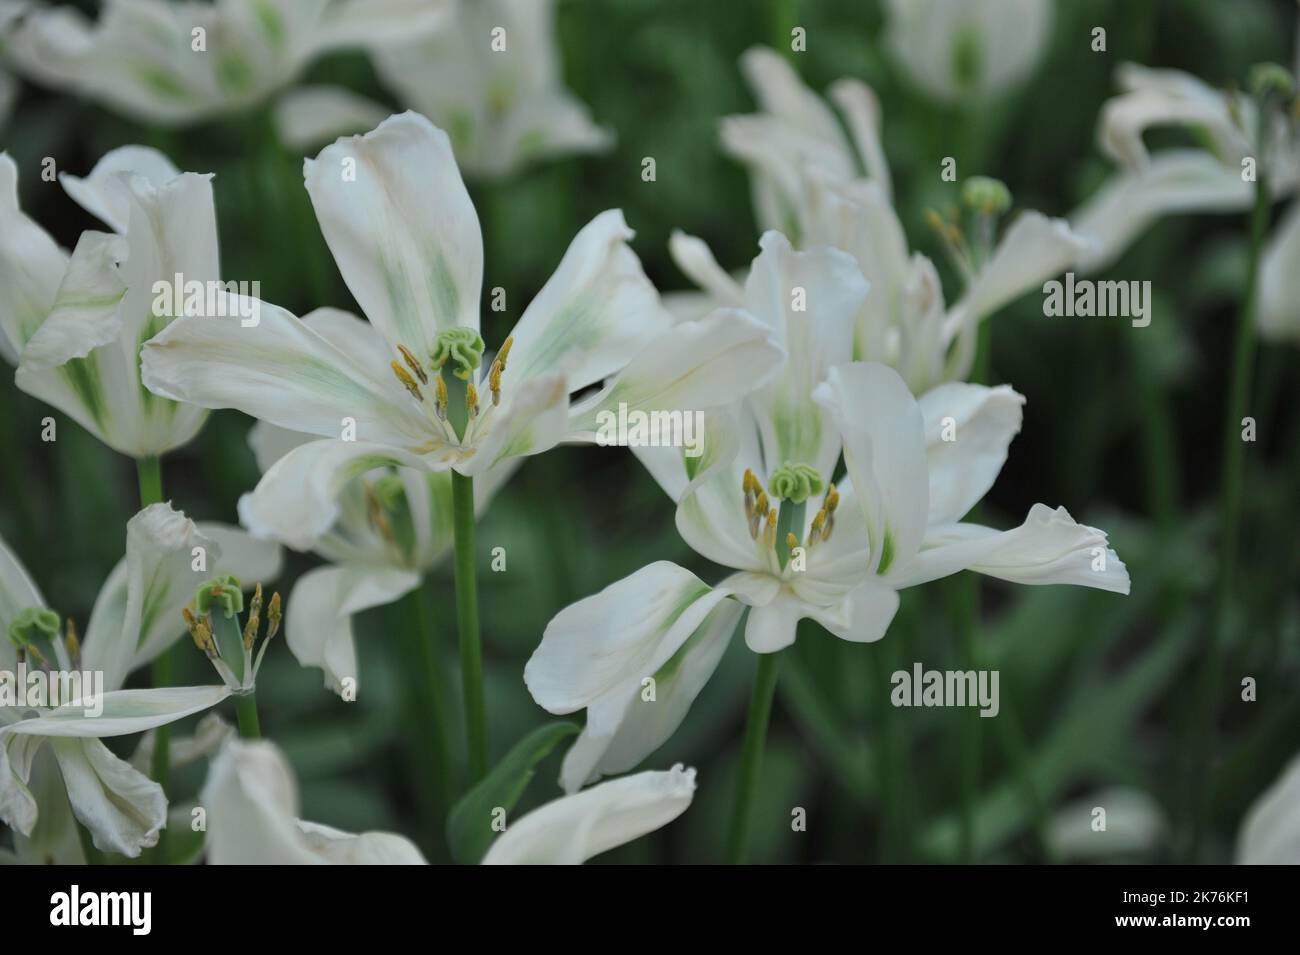 White and green Viridiflora tulips (Tulipa) Spring Green bloom in a garden in April Stock Photo